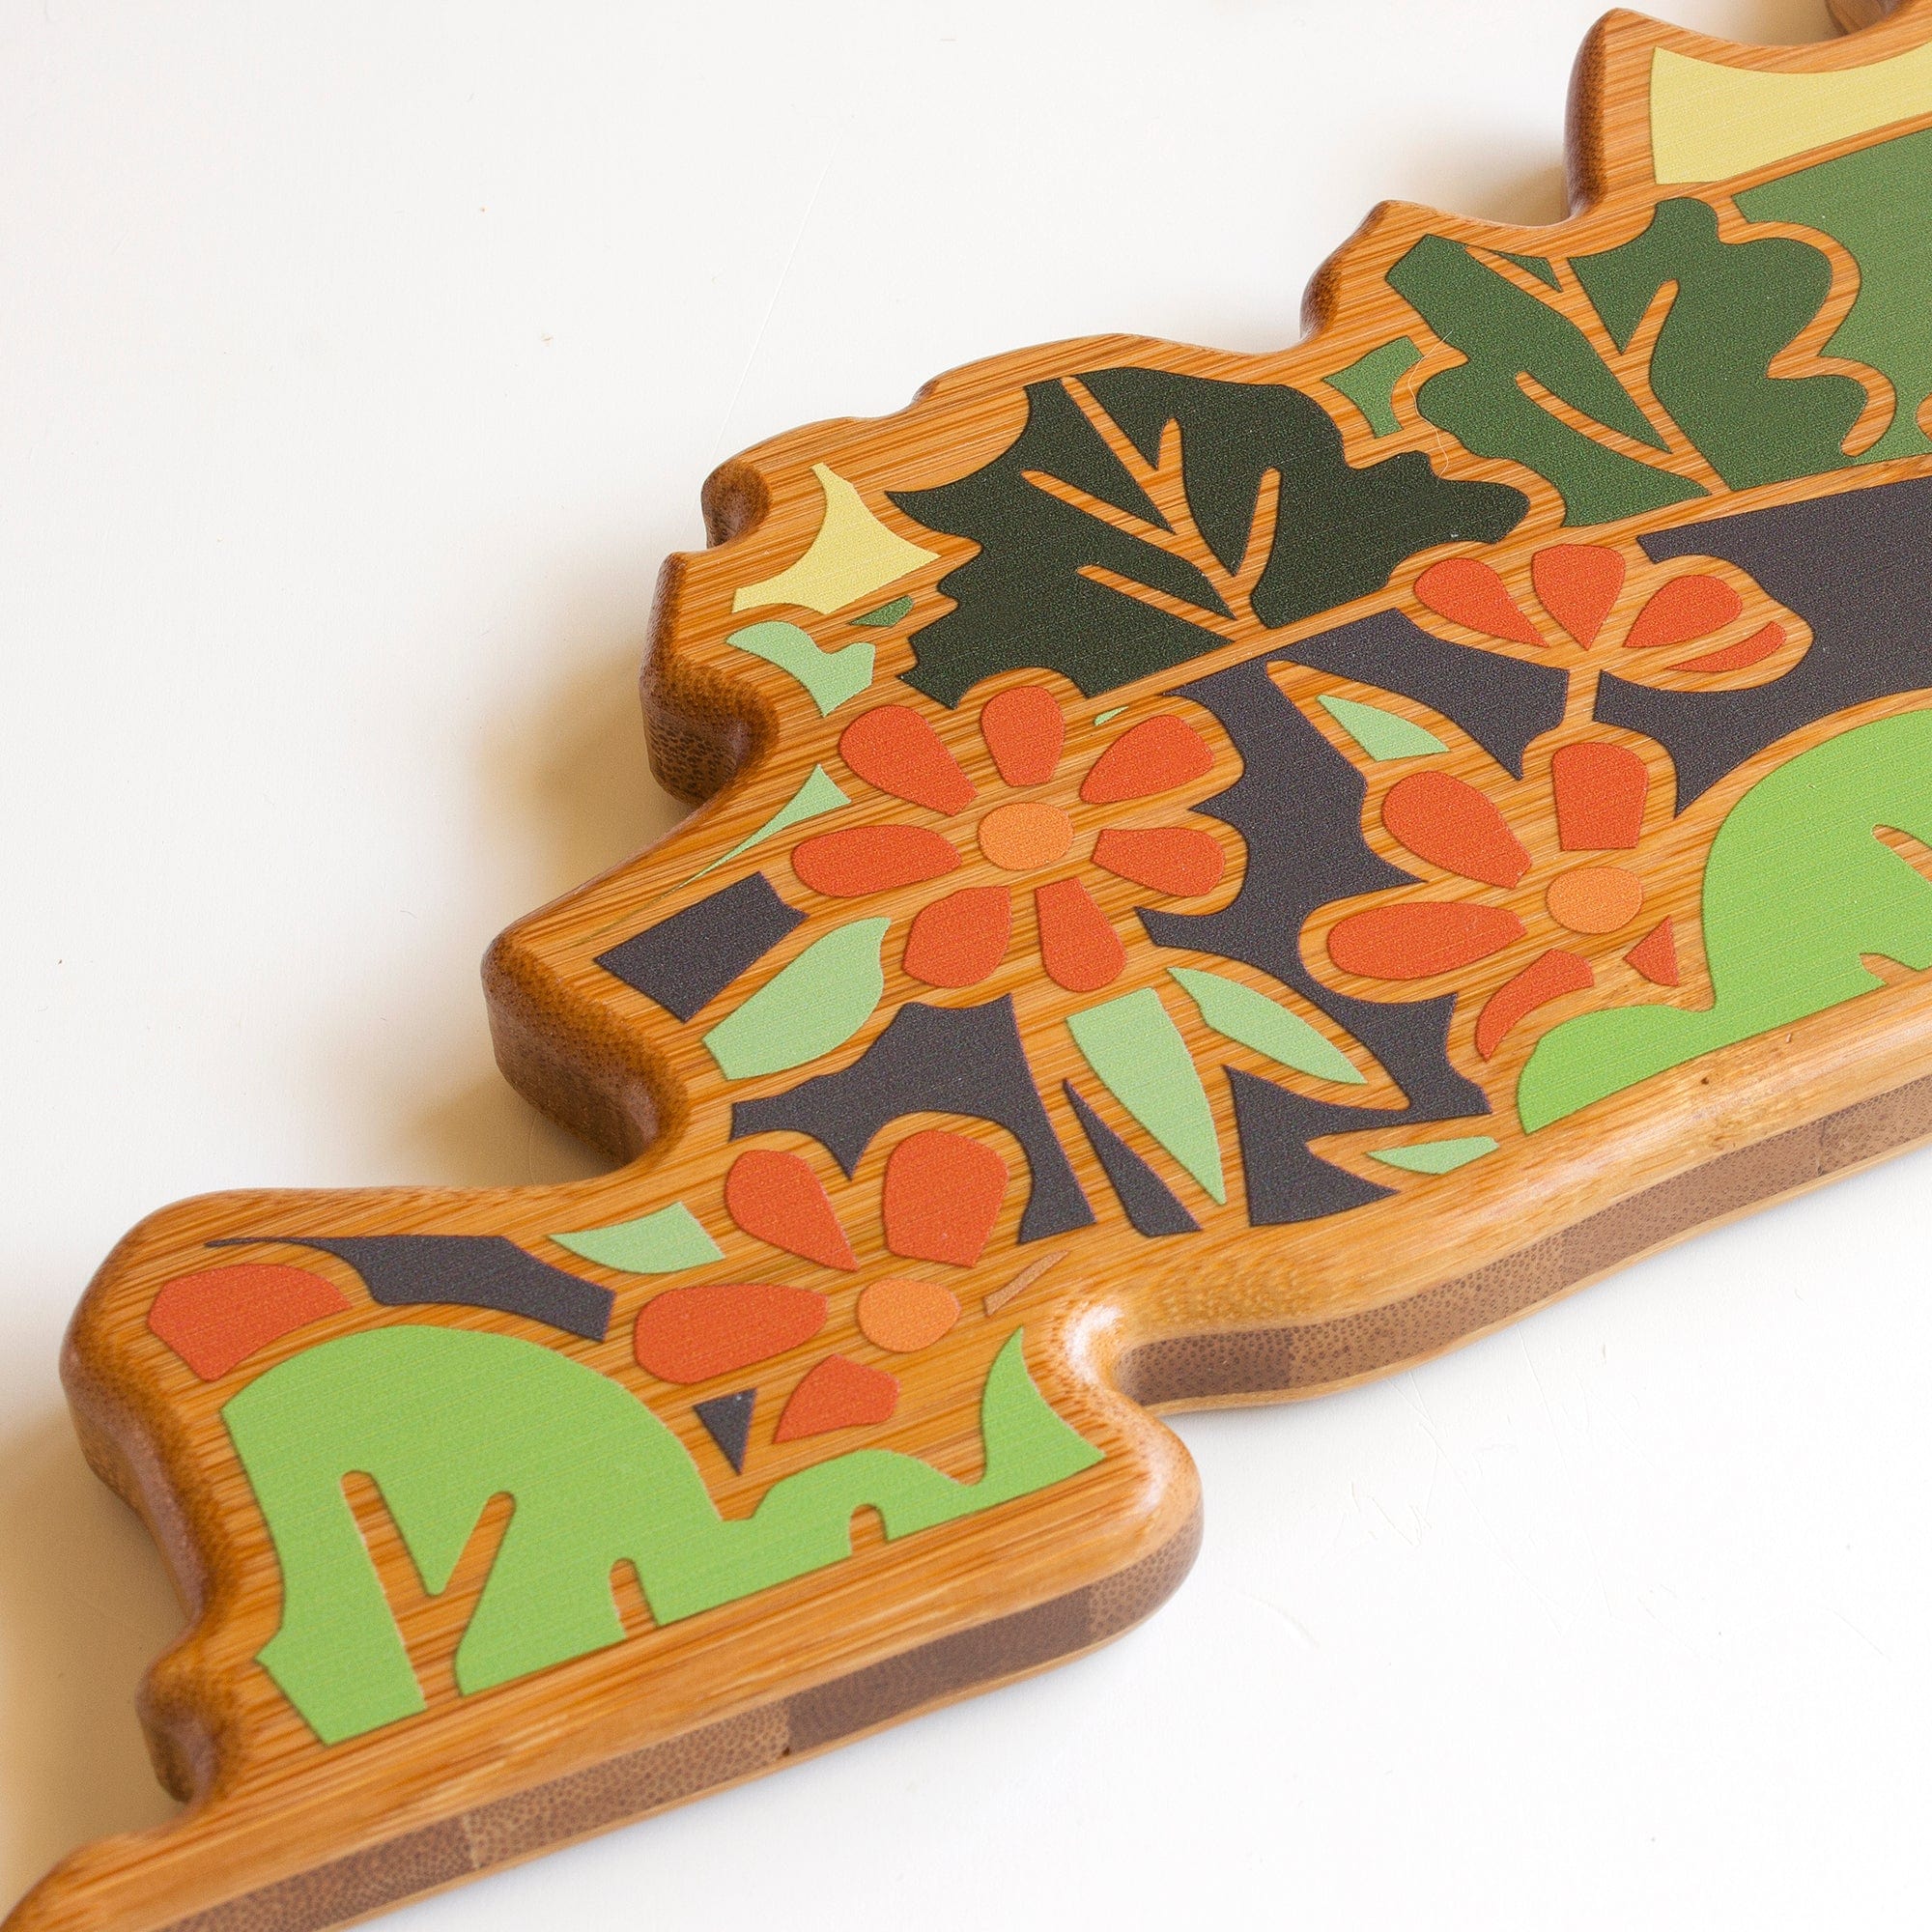 Totally Bamboo Kentucky State Shaped Serving and Cutting Board with Artwork by Summer Stokes